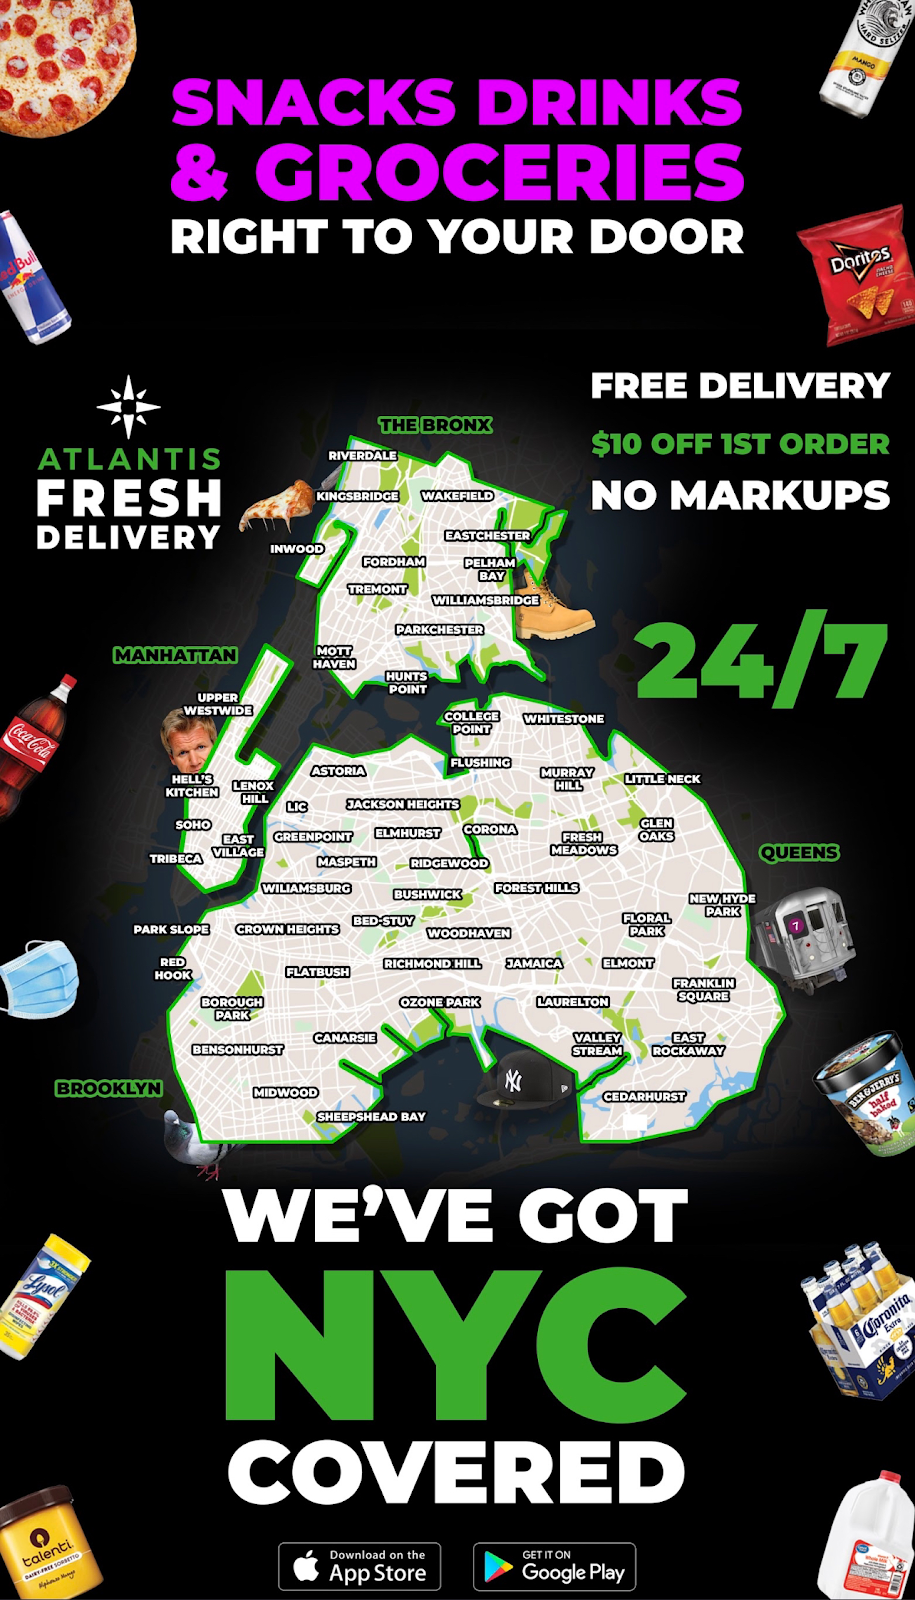 Atlantis Fresh Market - #7 (Now Delivering!) | 4147 Throgs Neck Expy, The Bronx, NY 10465 | Phone: (718) 887-7863